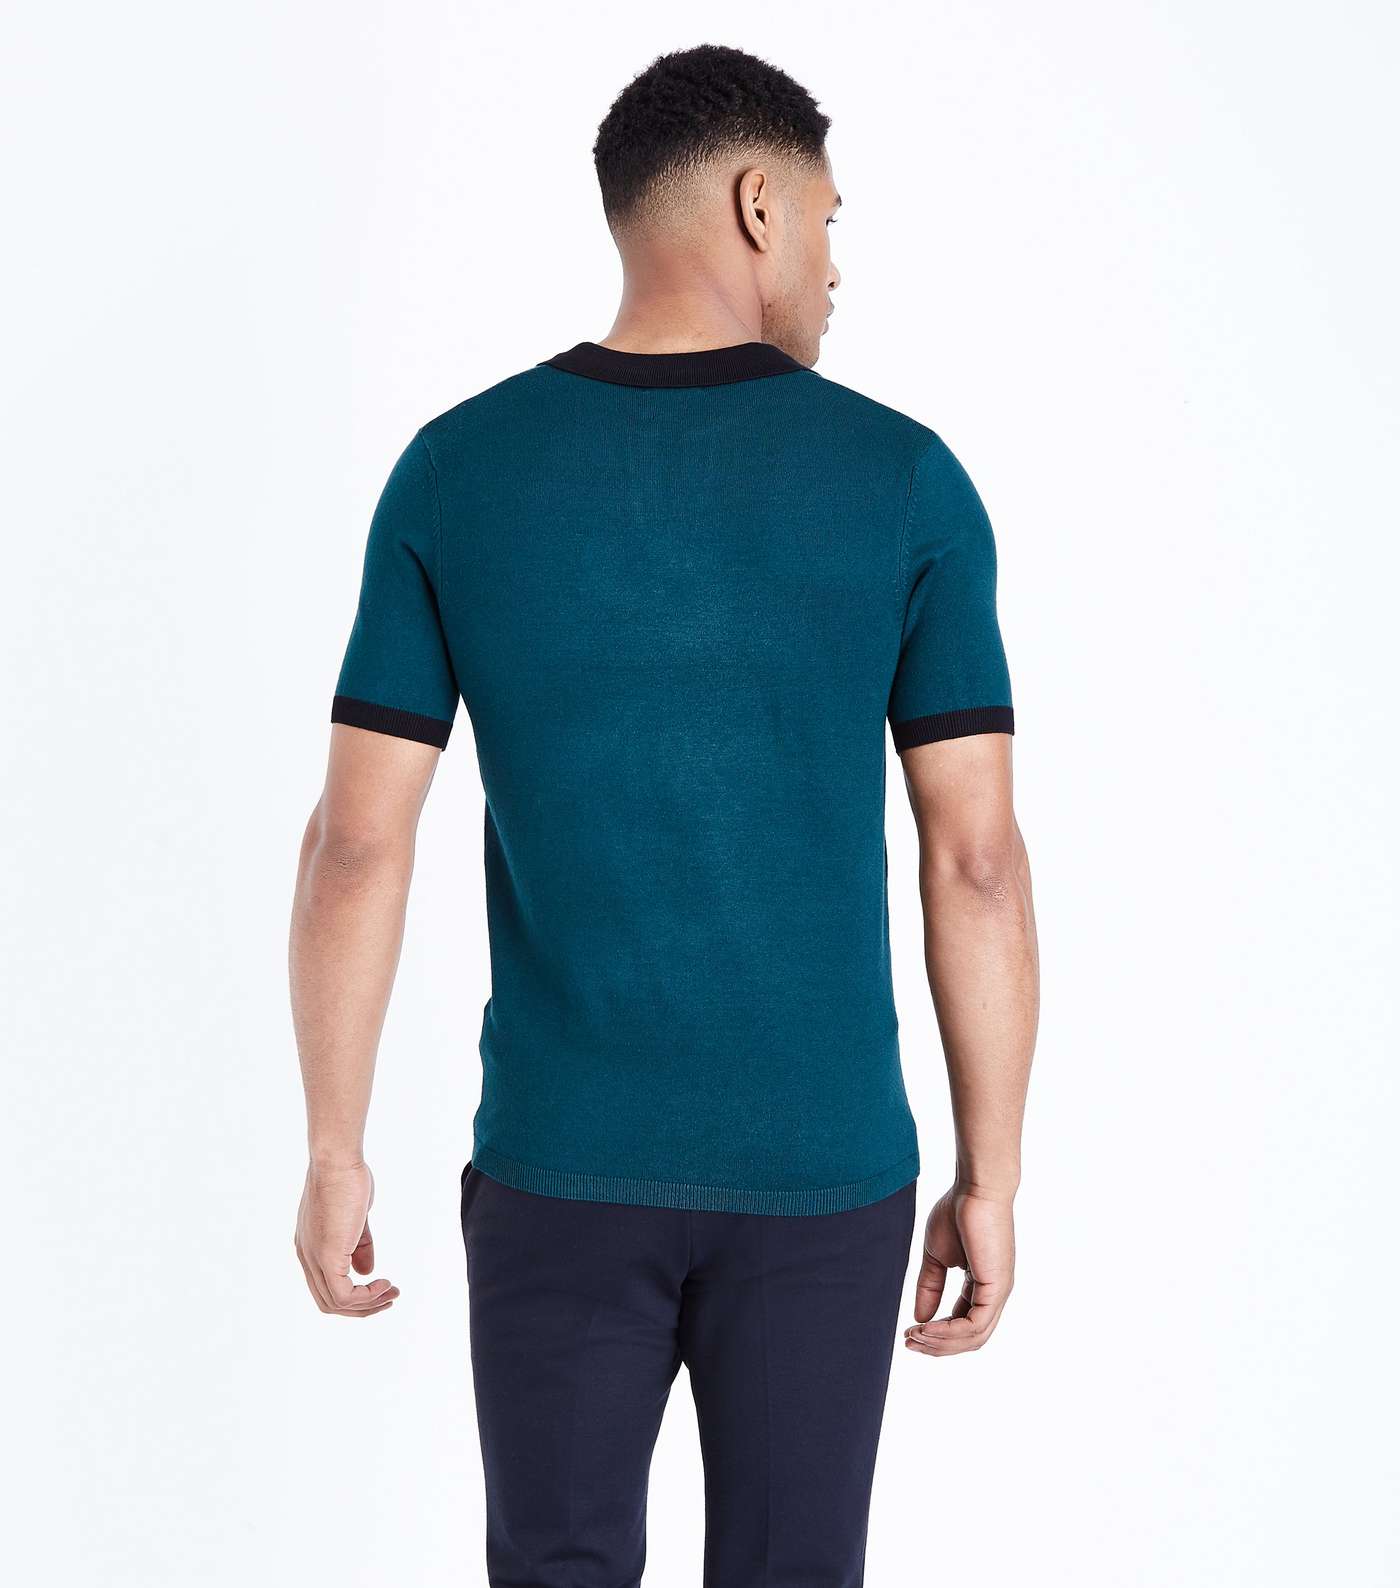 Teal White Revere Collar Knit Polo Shirt Image 3